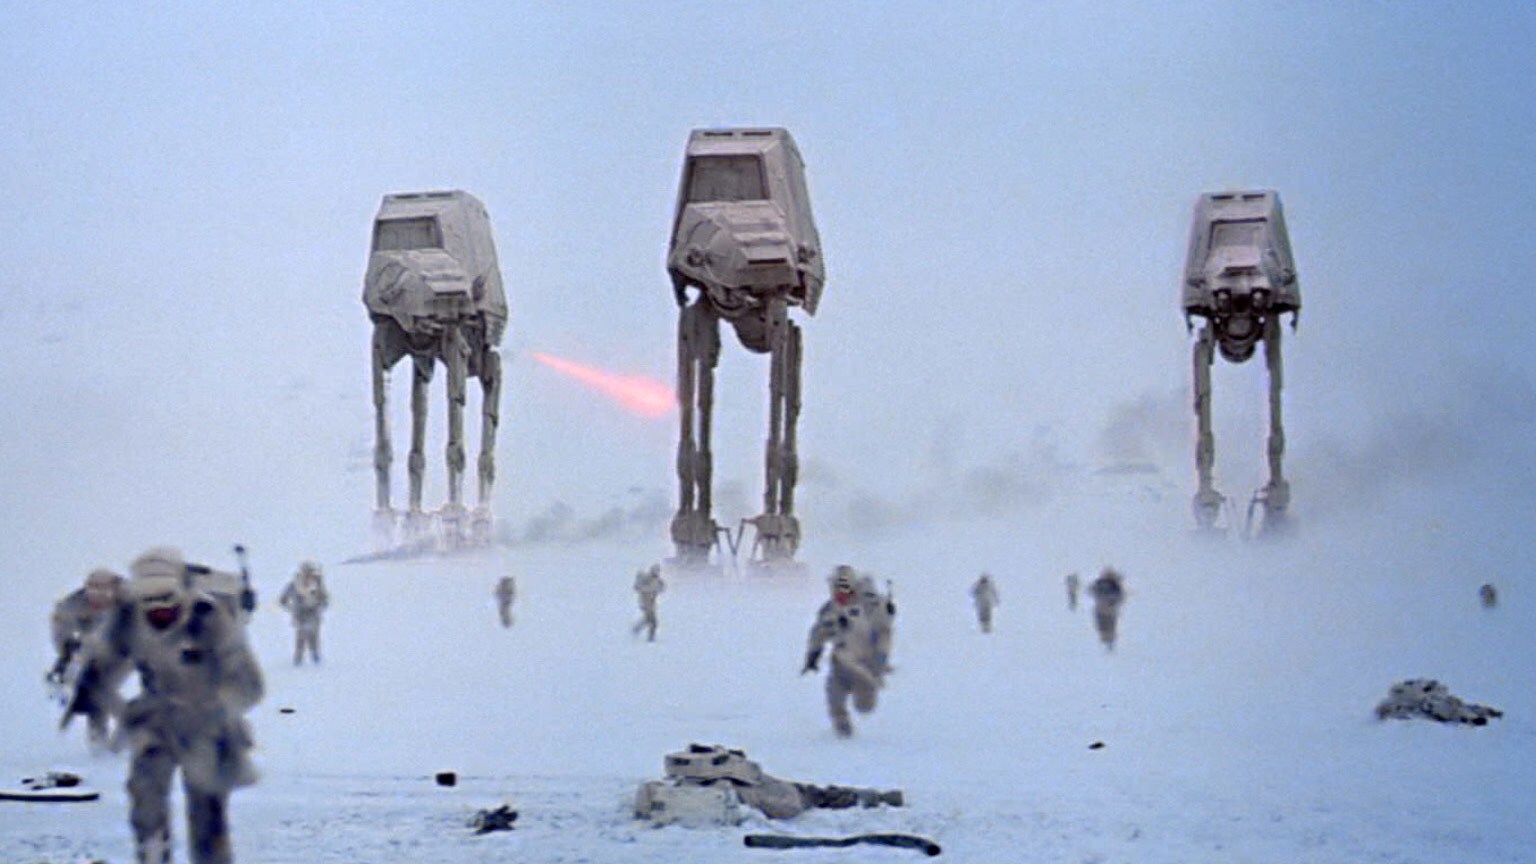 My Favorite Scene: The Battle of Hoth